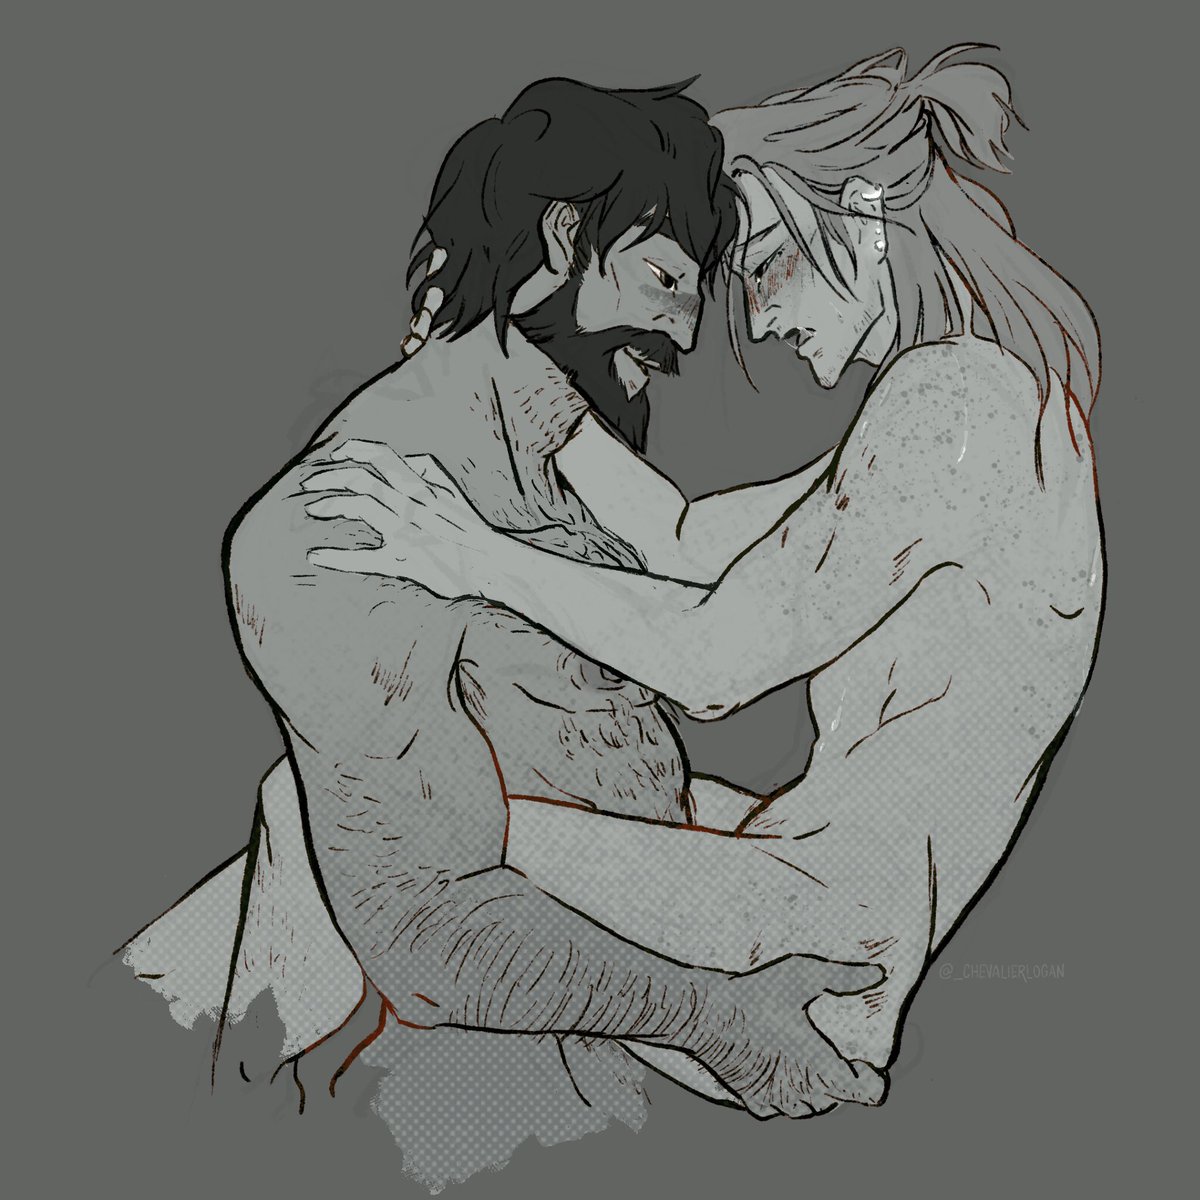 Starting commissions with some lovely Hawke and Anders for @ruumiinlaulaja 👀 Thank you for trusting me with this intimate scene. #nsfw #da2